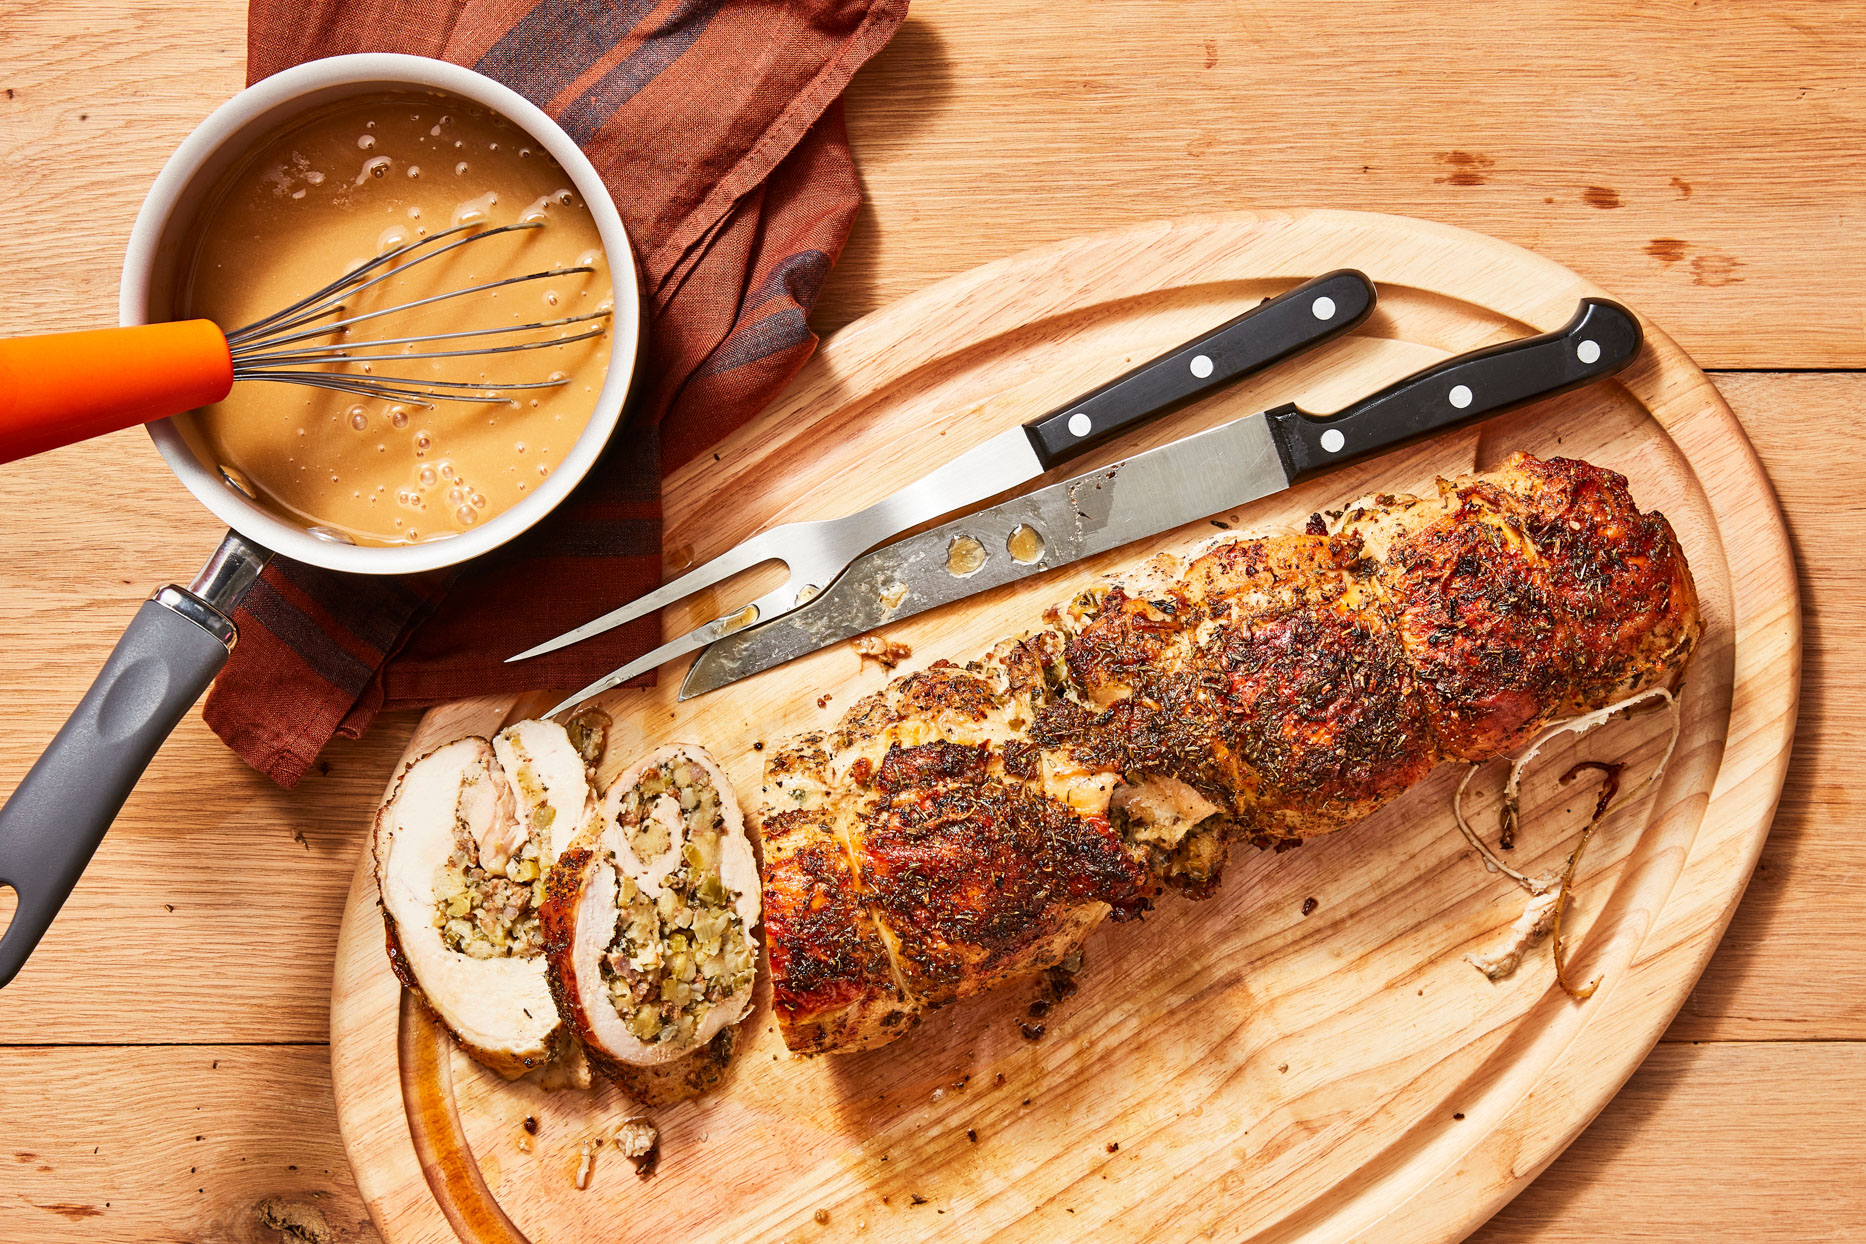 Rachael Ray's Turkey Breast Roulade with Simple Gravy